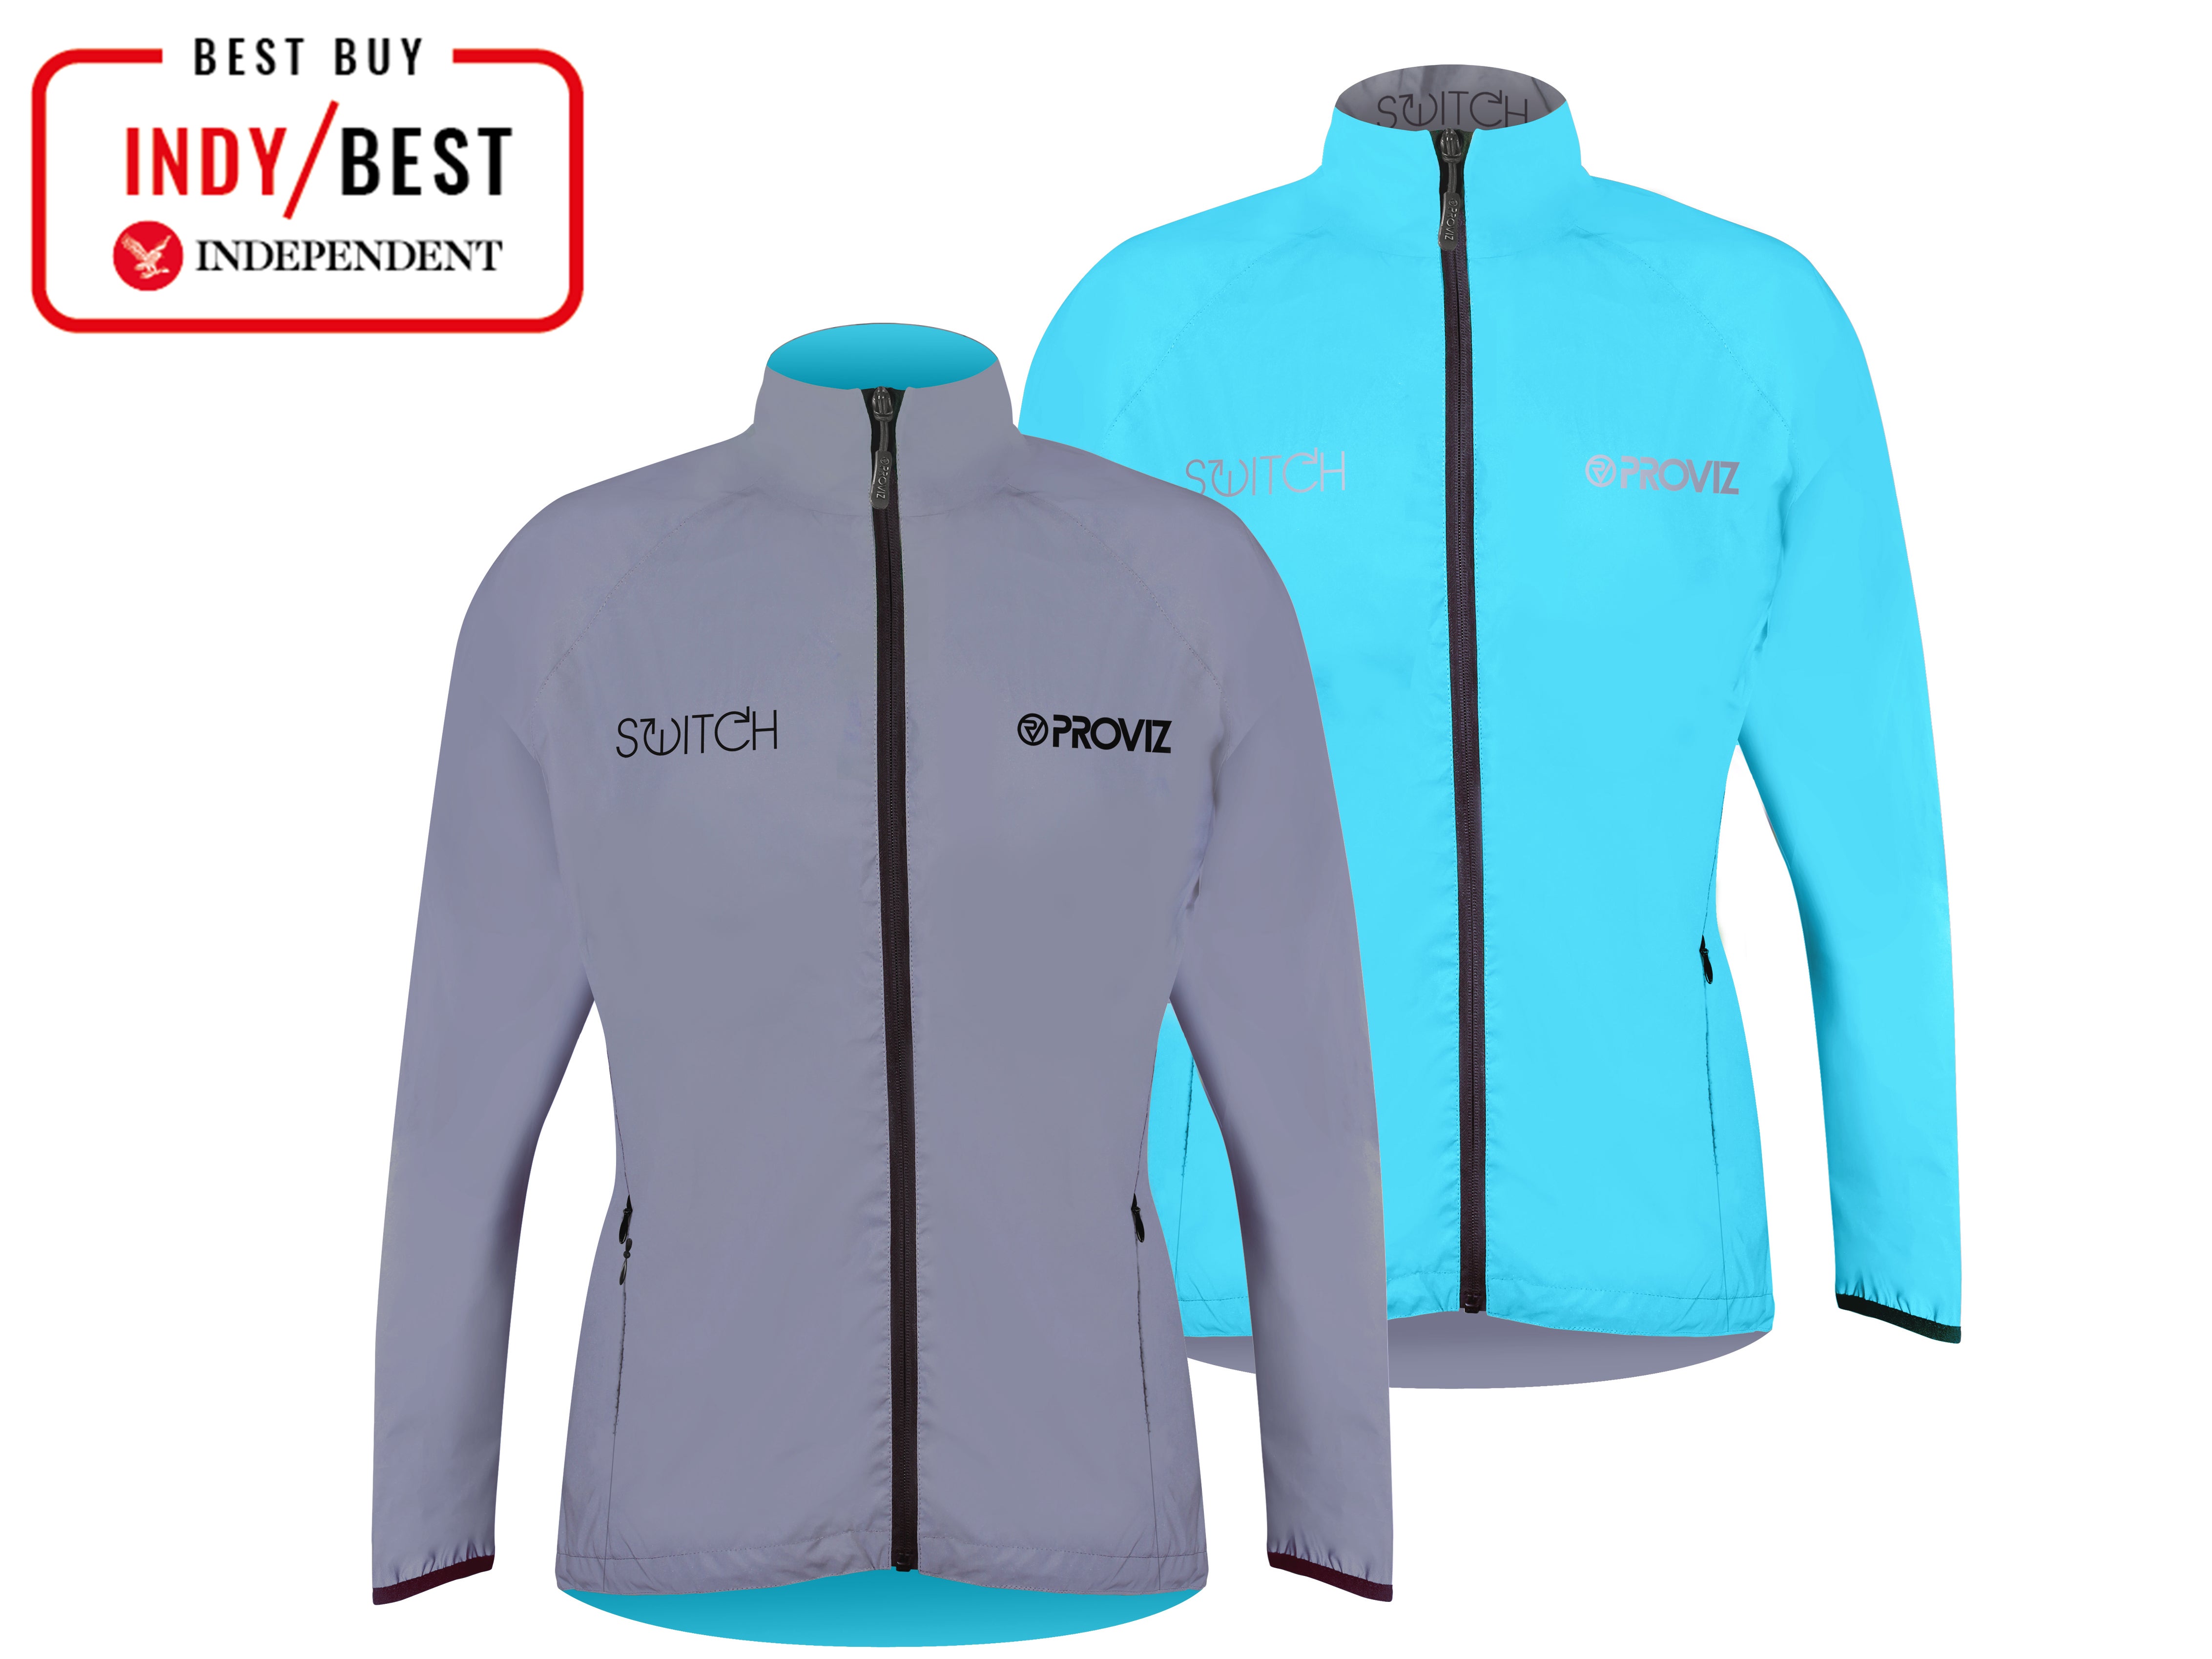 The Proviz switch cycling jacket outshone all other reflective cycling jackets in our roundup